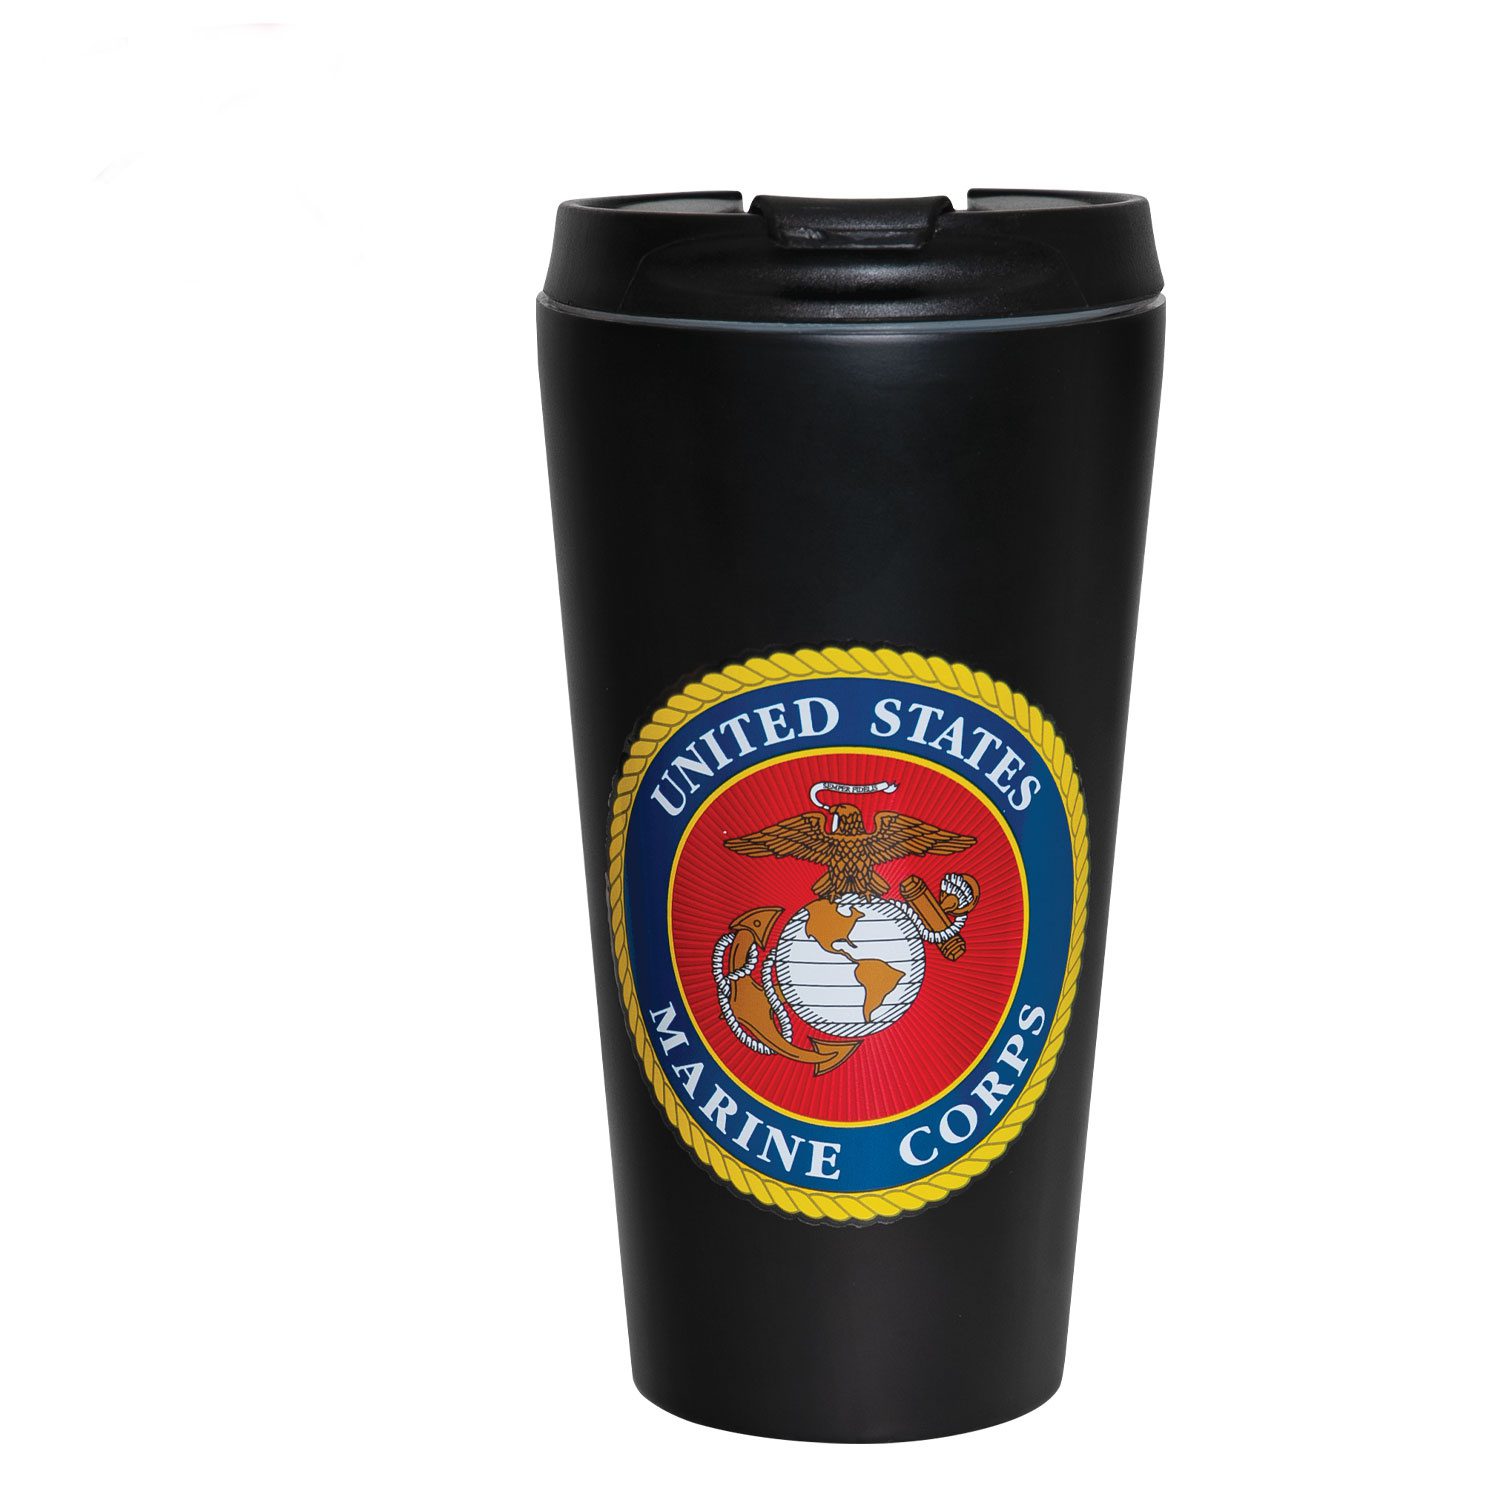 United States Marines Travel Cup